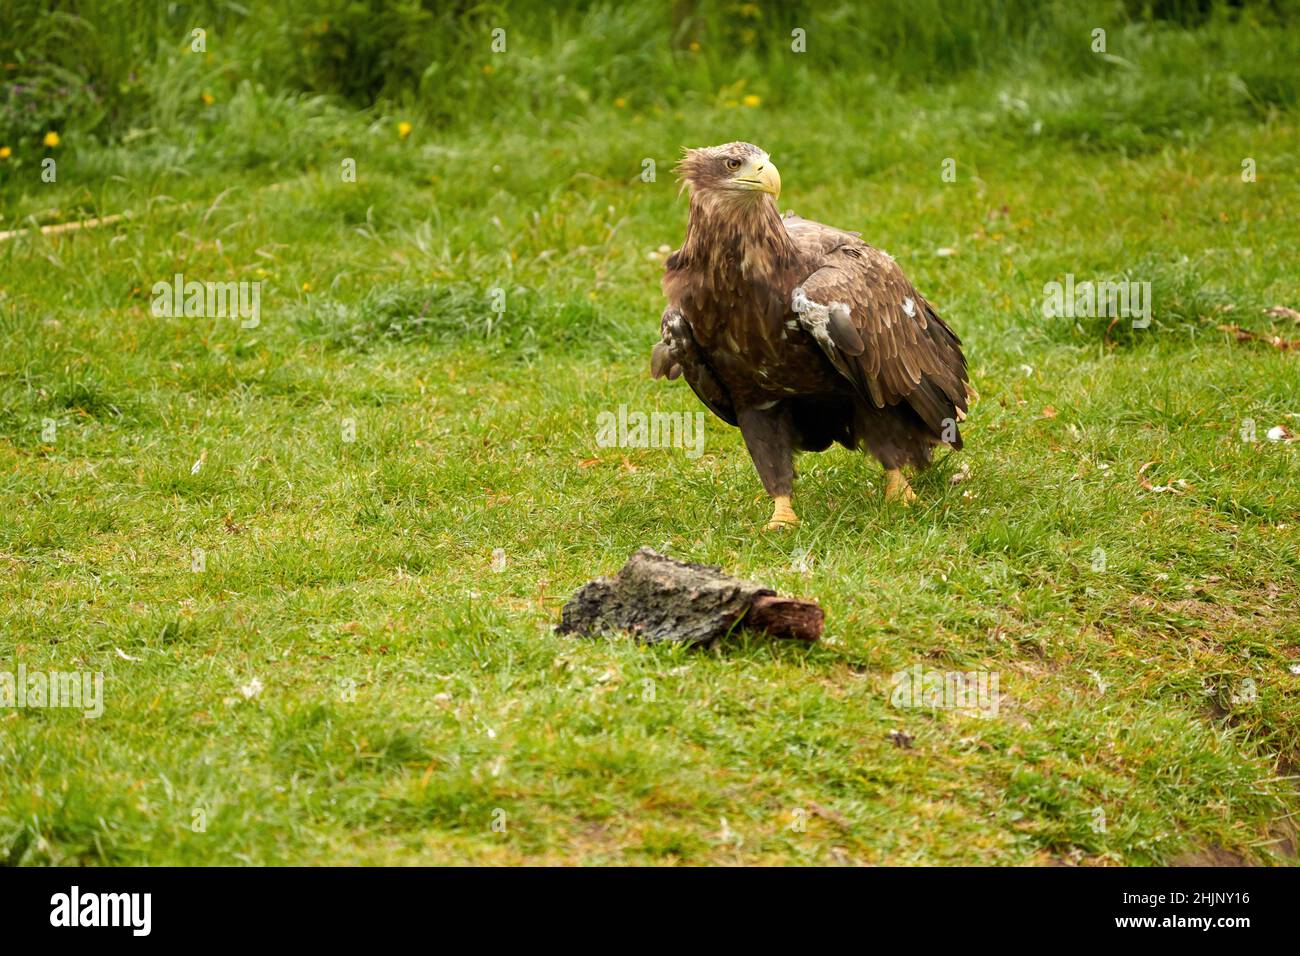 A detailed bald eagle walks in the green grass. The large brown bird of ...